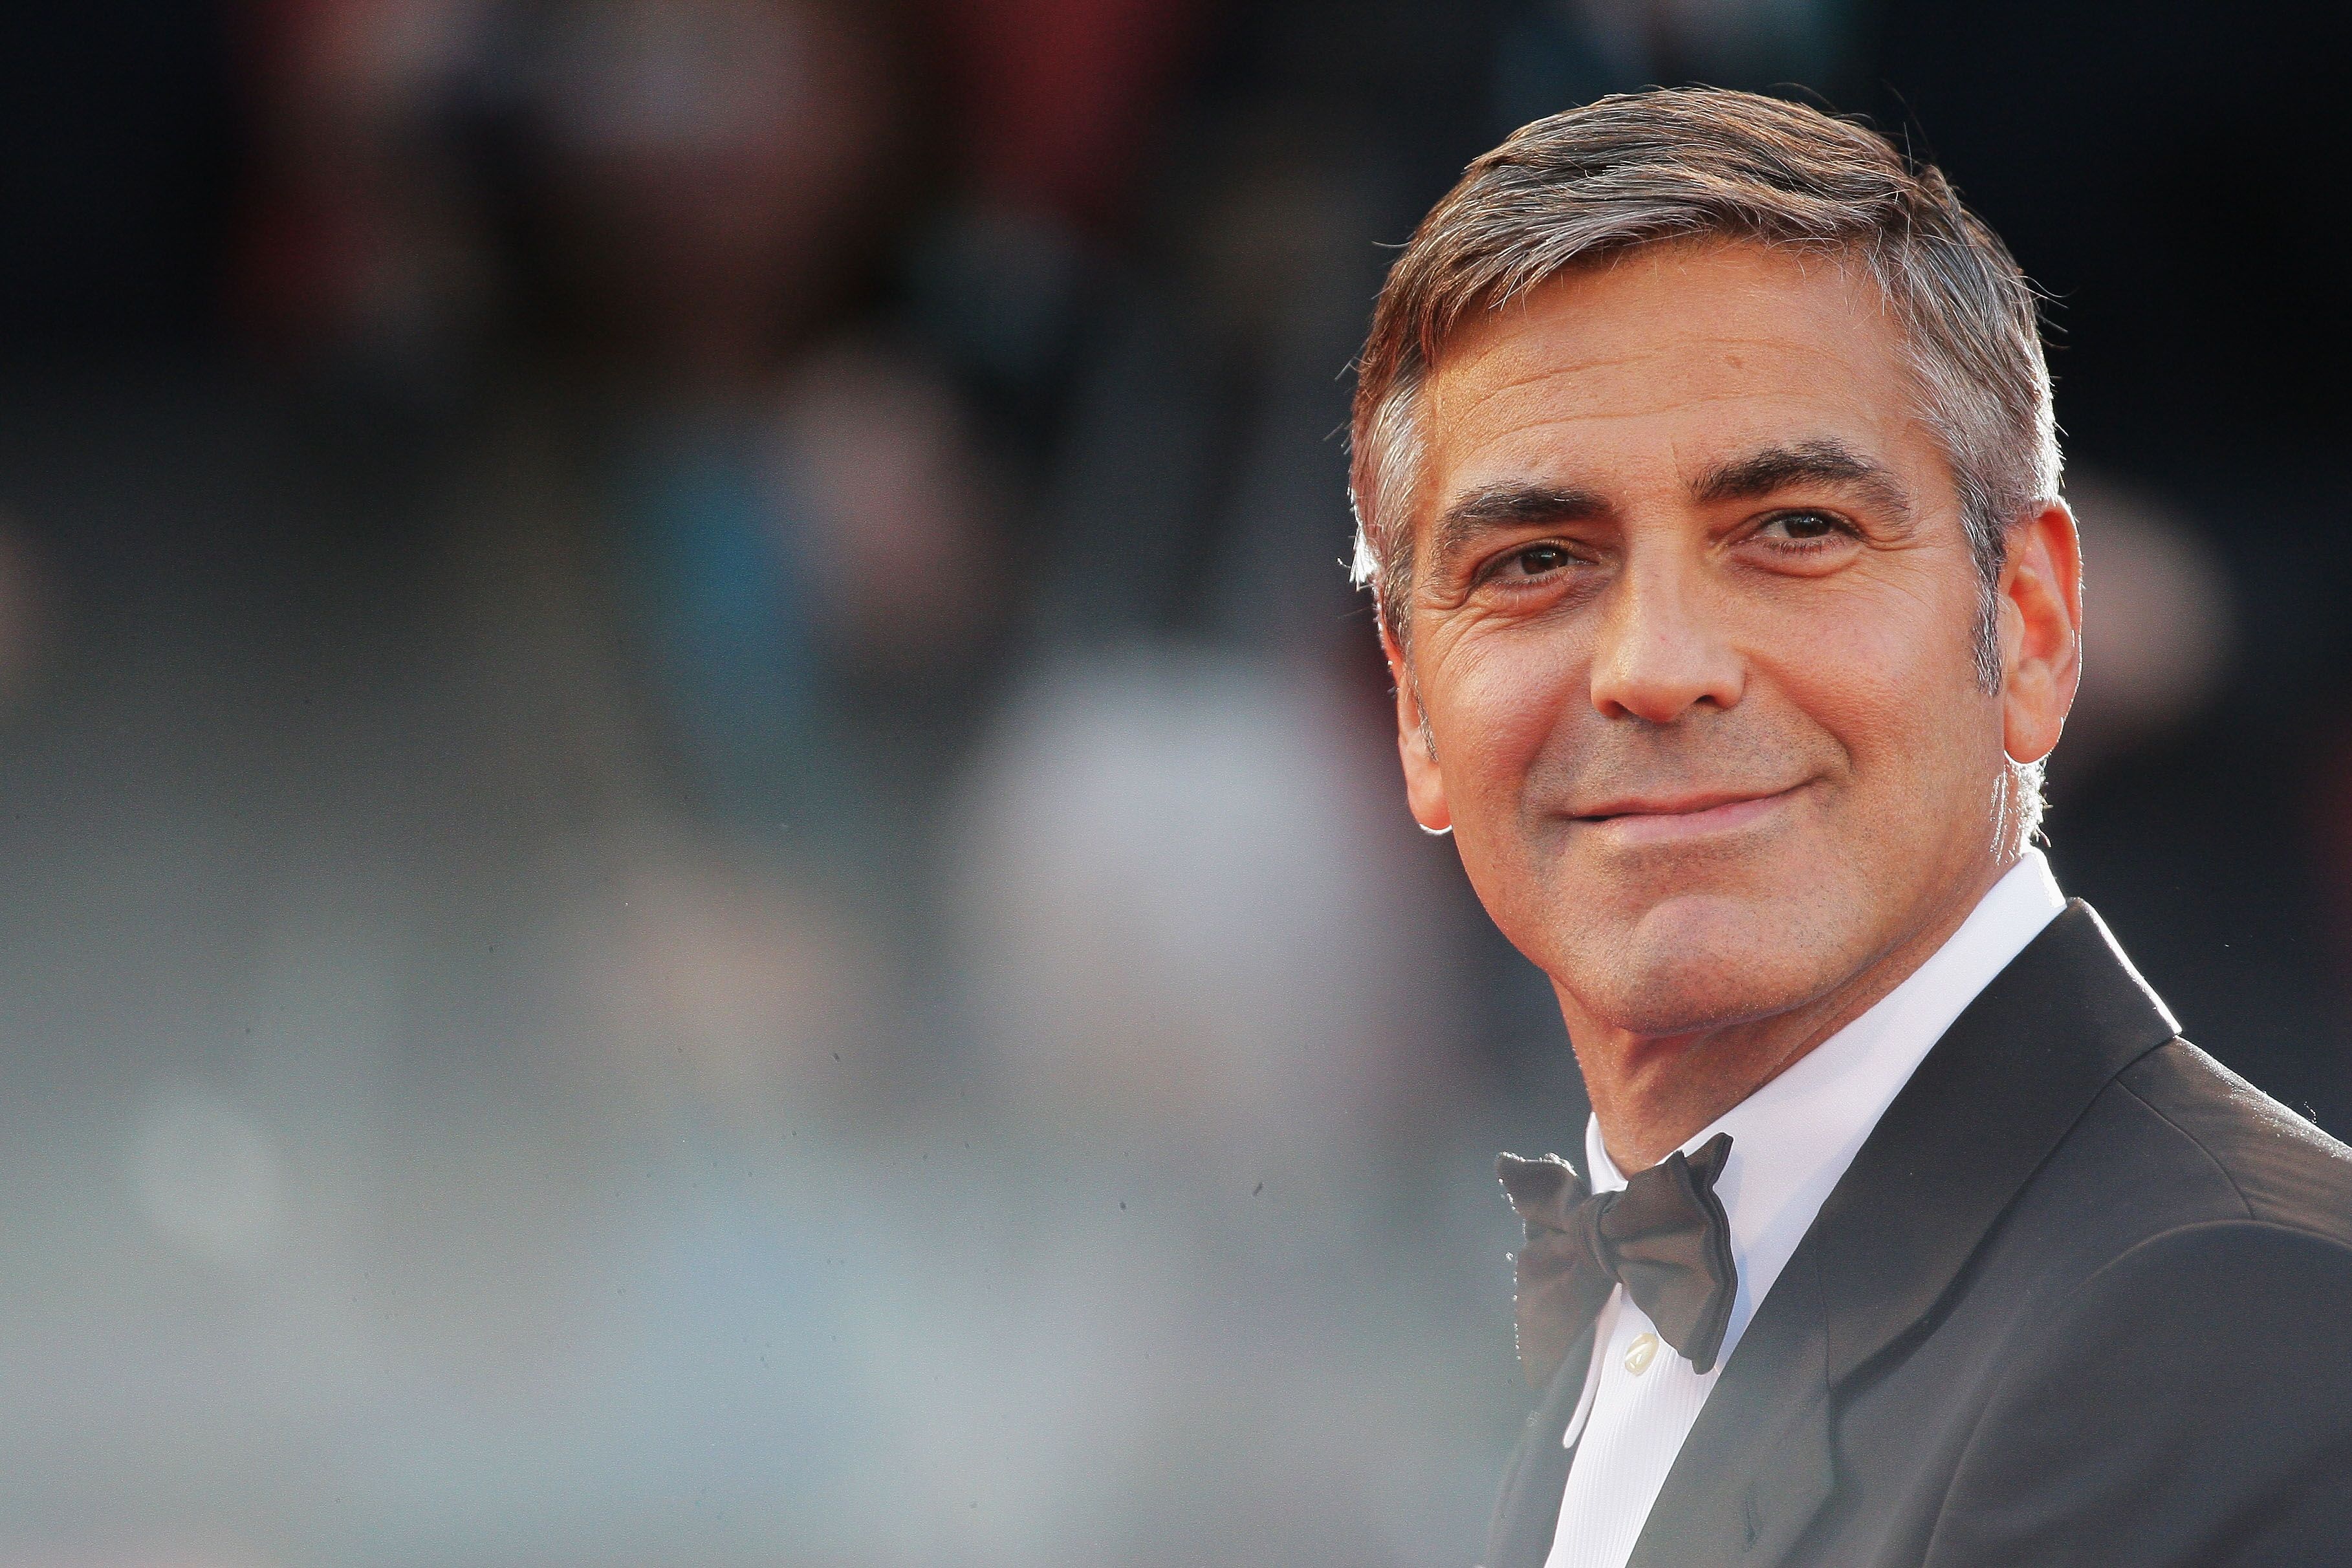 George Clooney at "The Men Who Stare At Goats" premiere at the Sala Grande during the 66th Venice Film Festival in 2009 | Photo: Getty Images